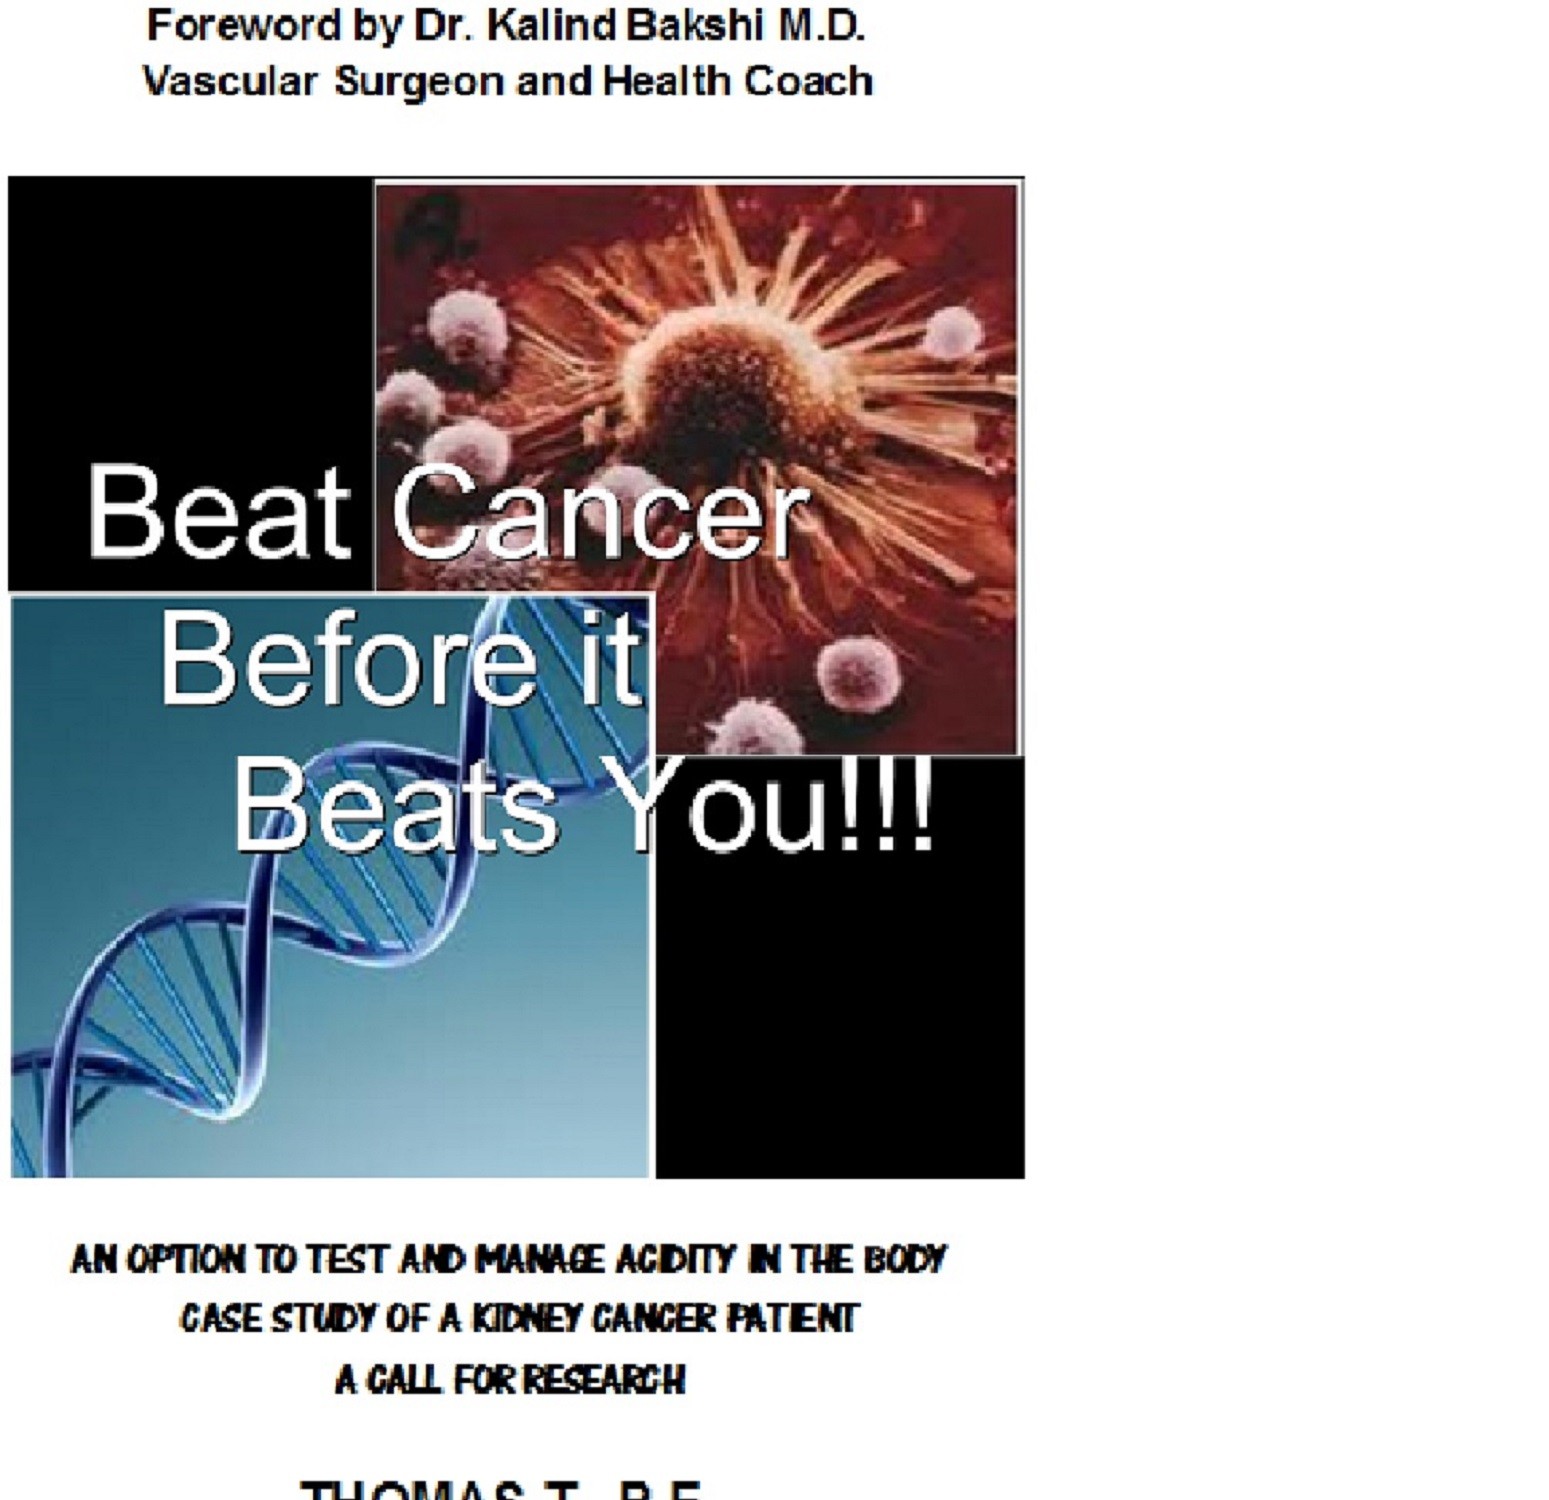 Beat Cancer Before it Beats You!!!